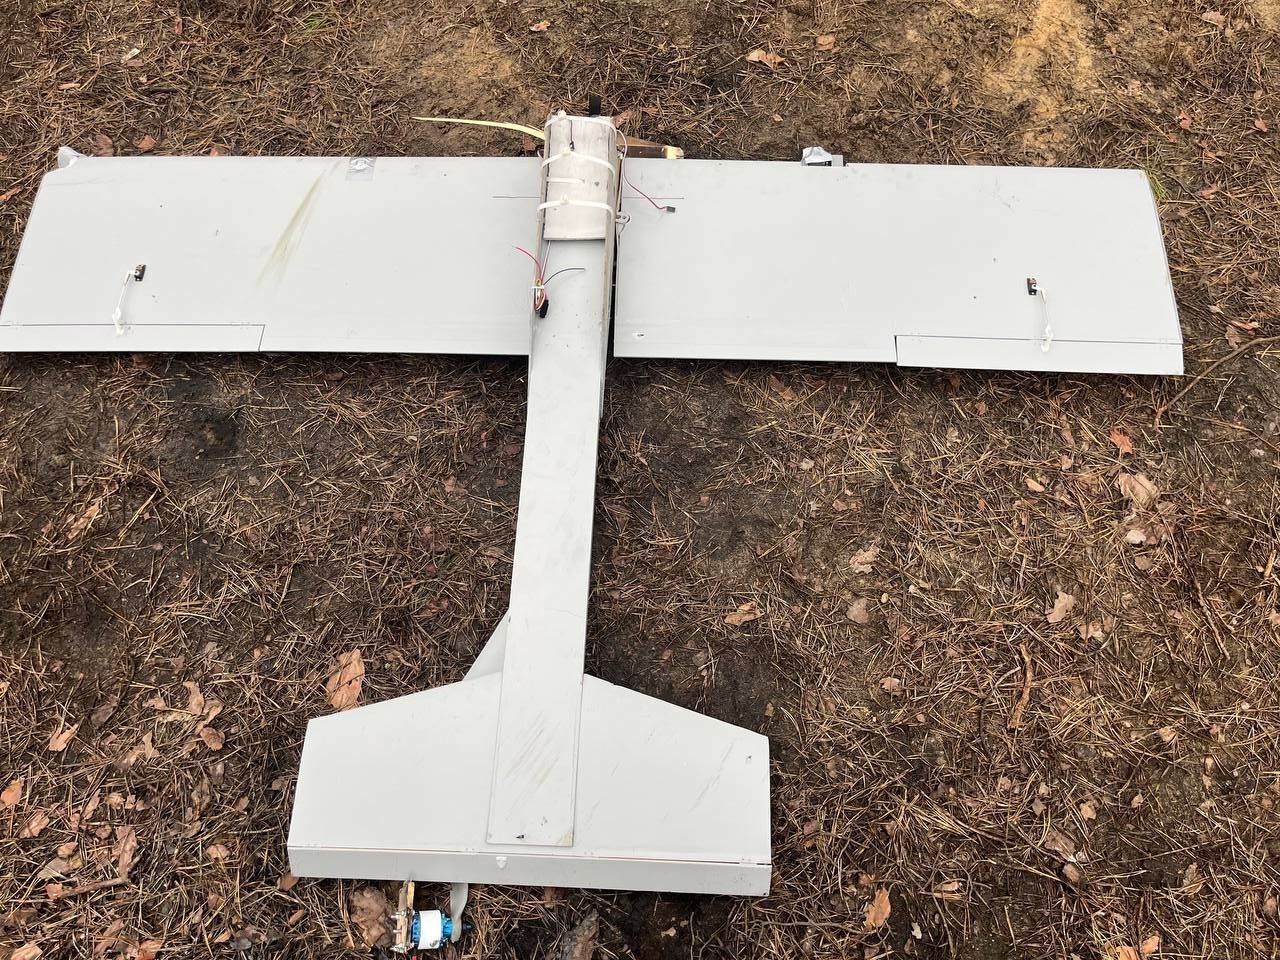 One of the winged explosive drones downed by russian forces in Ukraine, most probably the Darts winged FPV